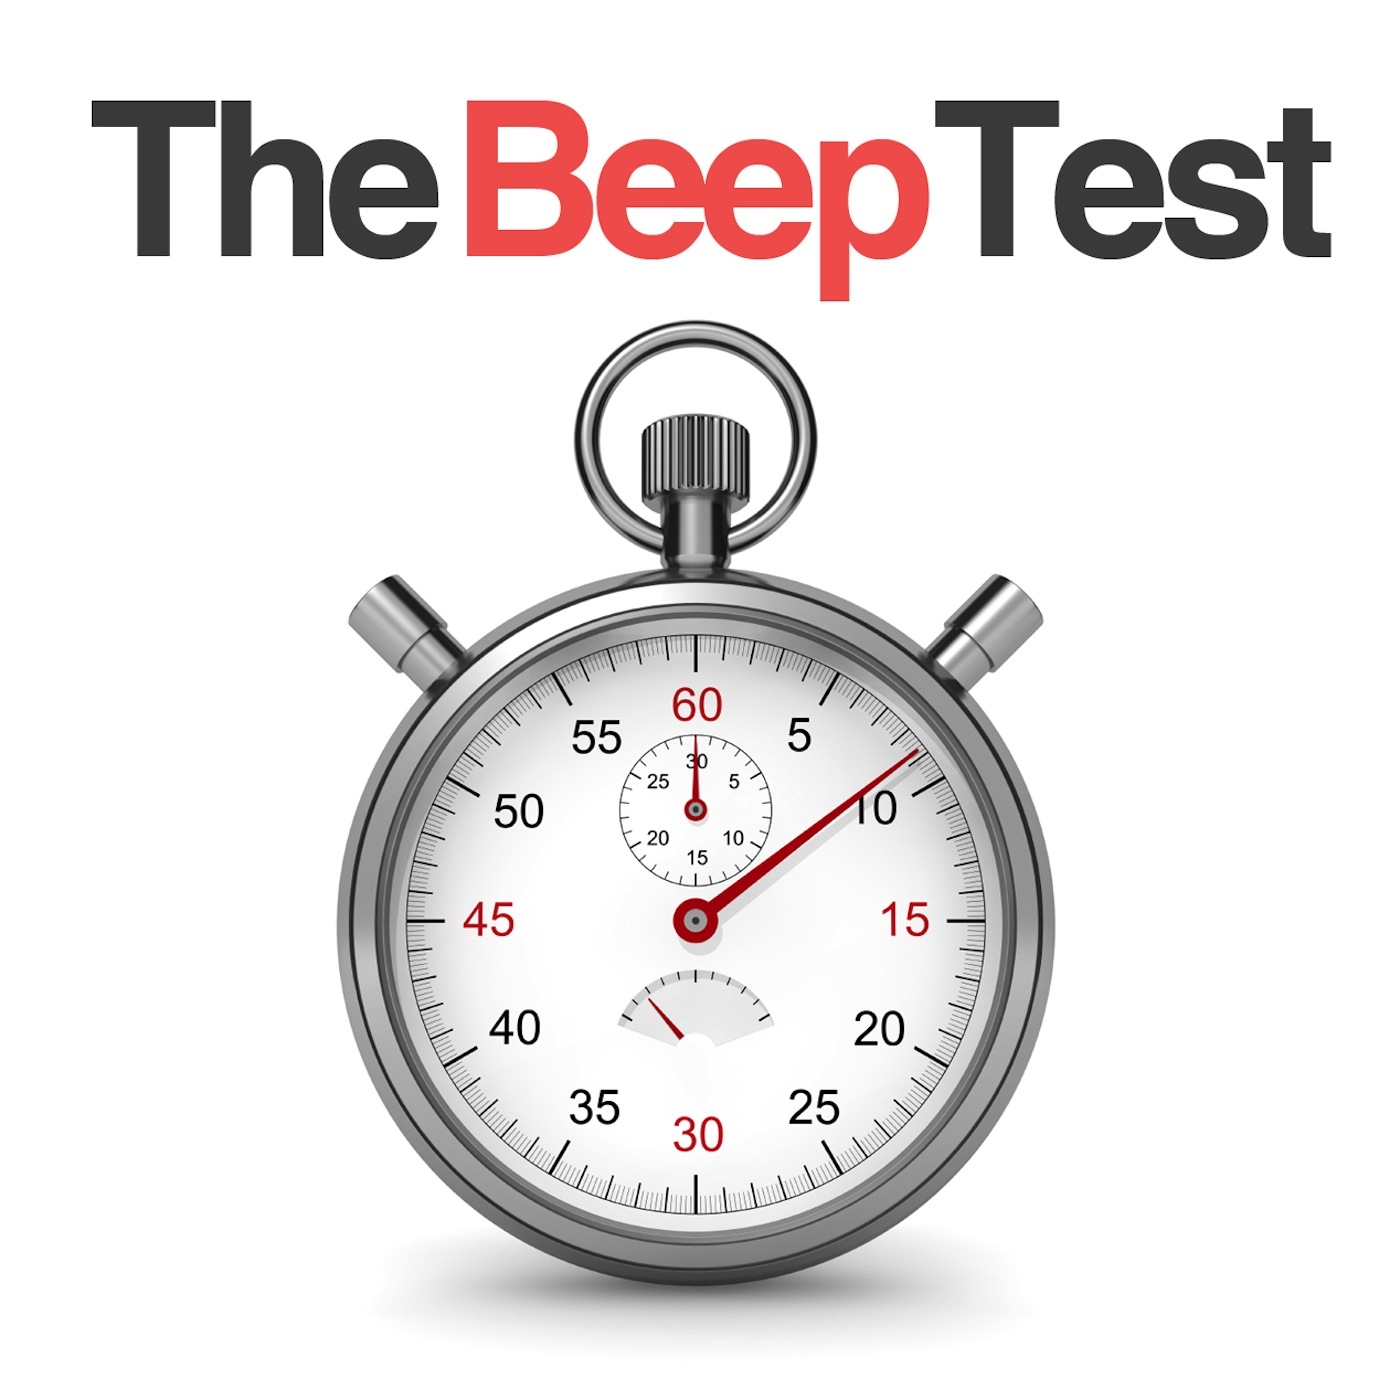 The Beep Test: The Best 20 Metre and 15 Metre Bleep Test for Personal Fitness & Recruitment Practice to the Police, RAF, Army, Fire Brigade, Royal Air Force, Royal Navy and the Emergency Services